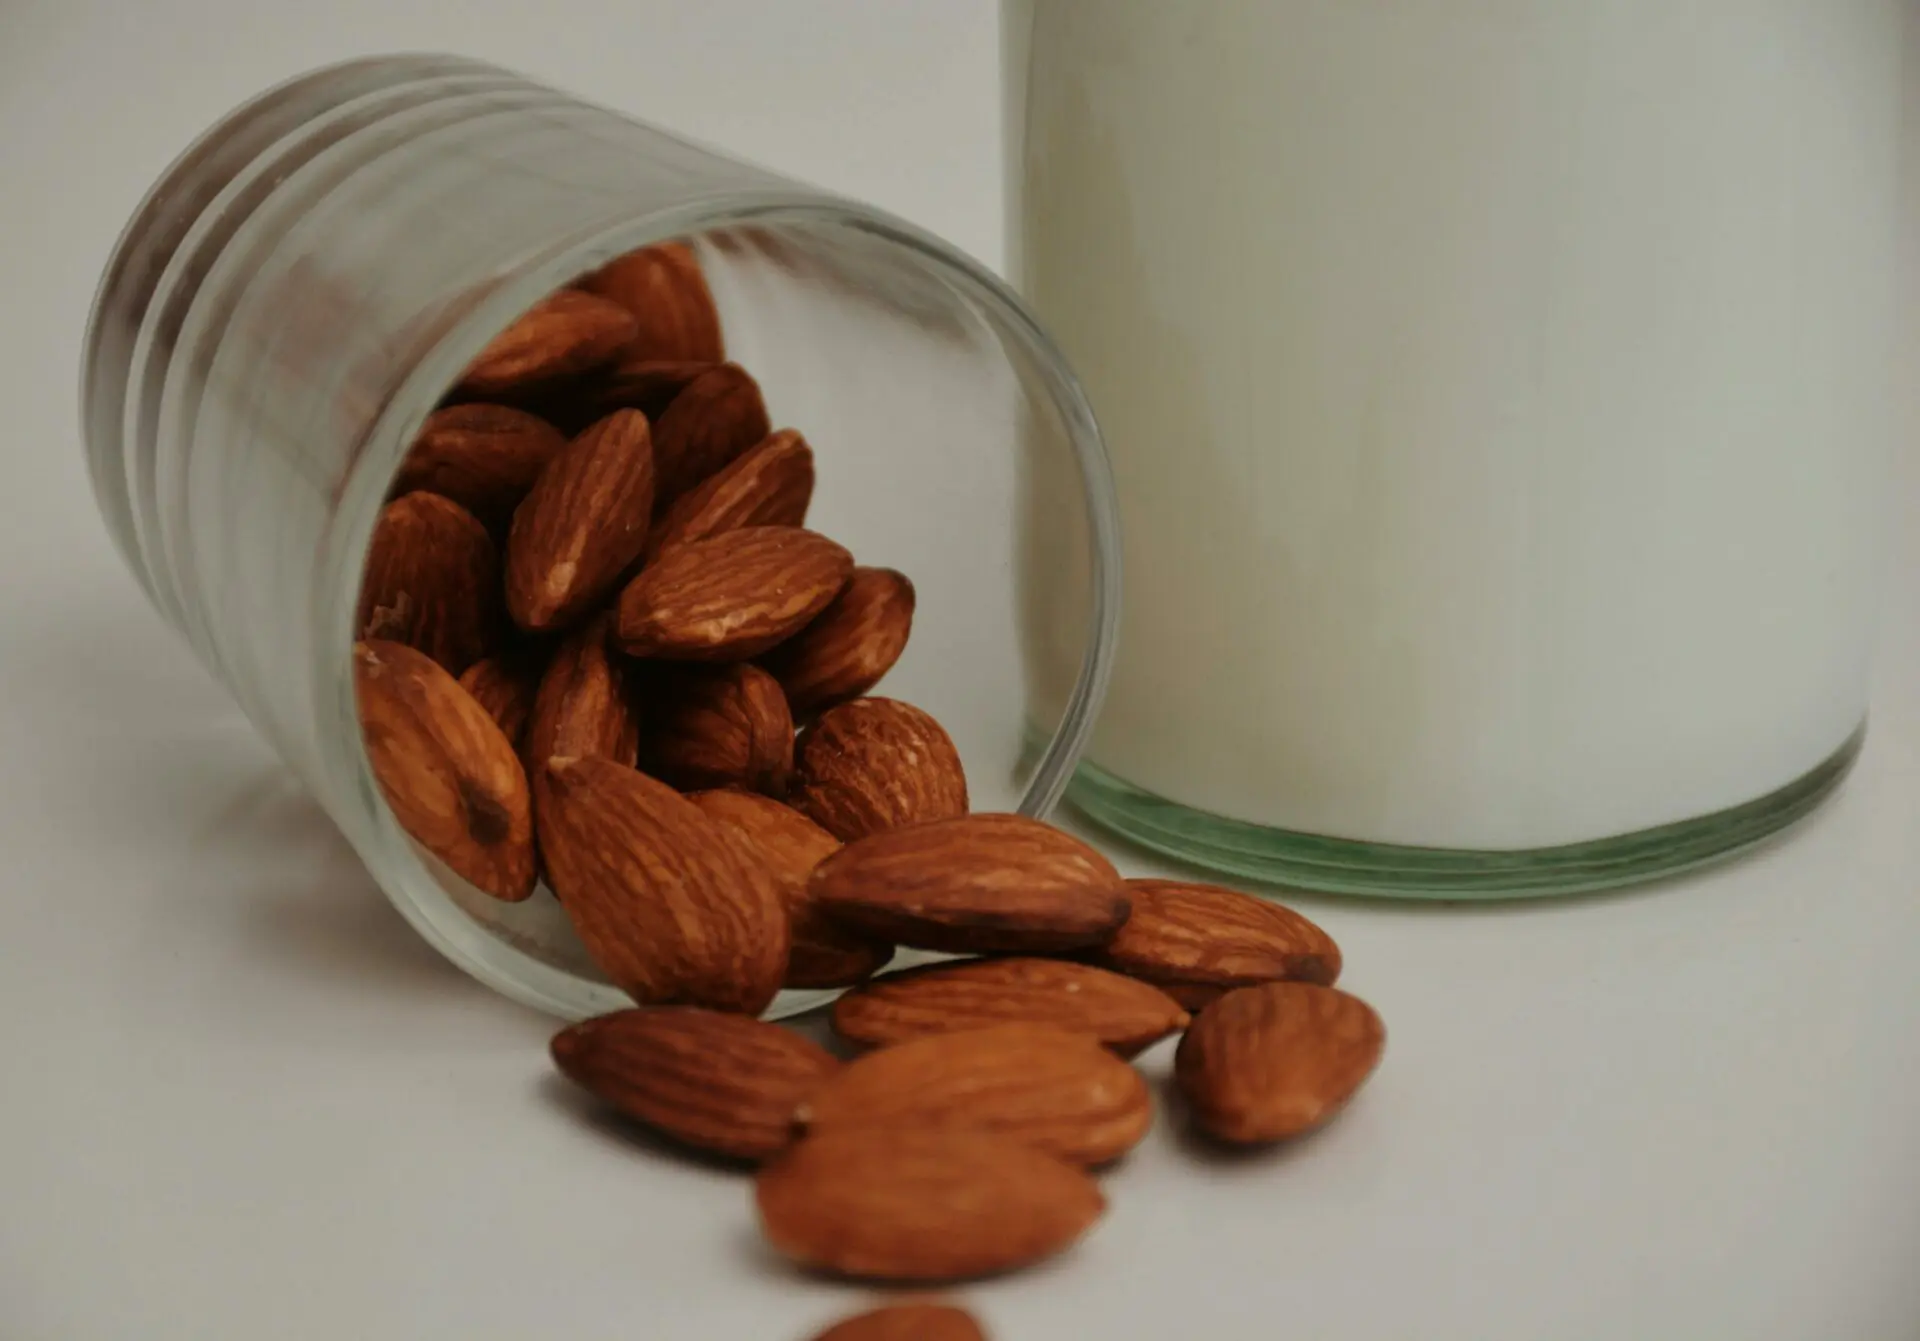 Truth About Almond Milk’s Shelf Life: Does It Expire?